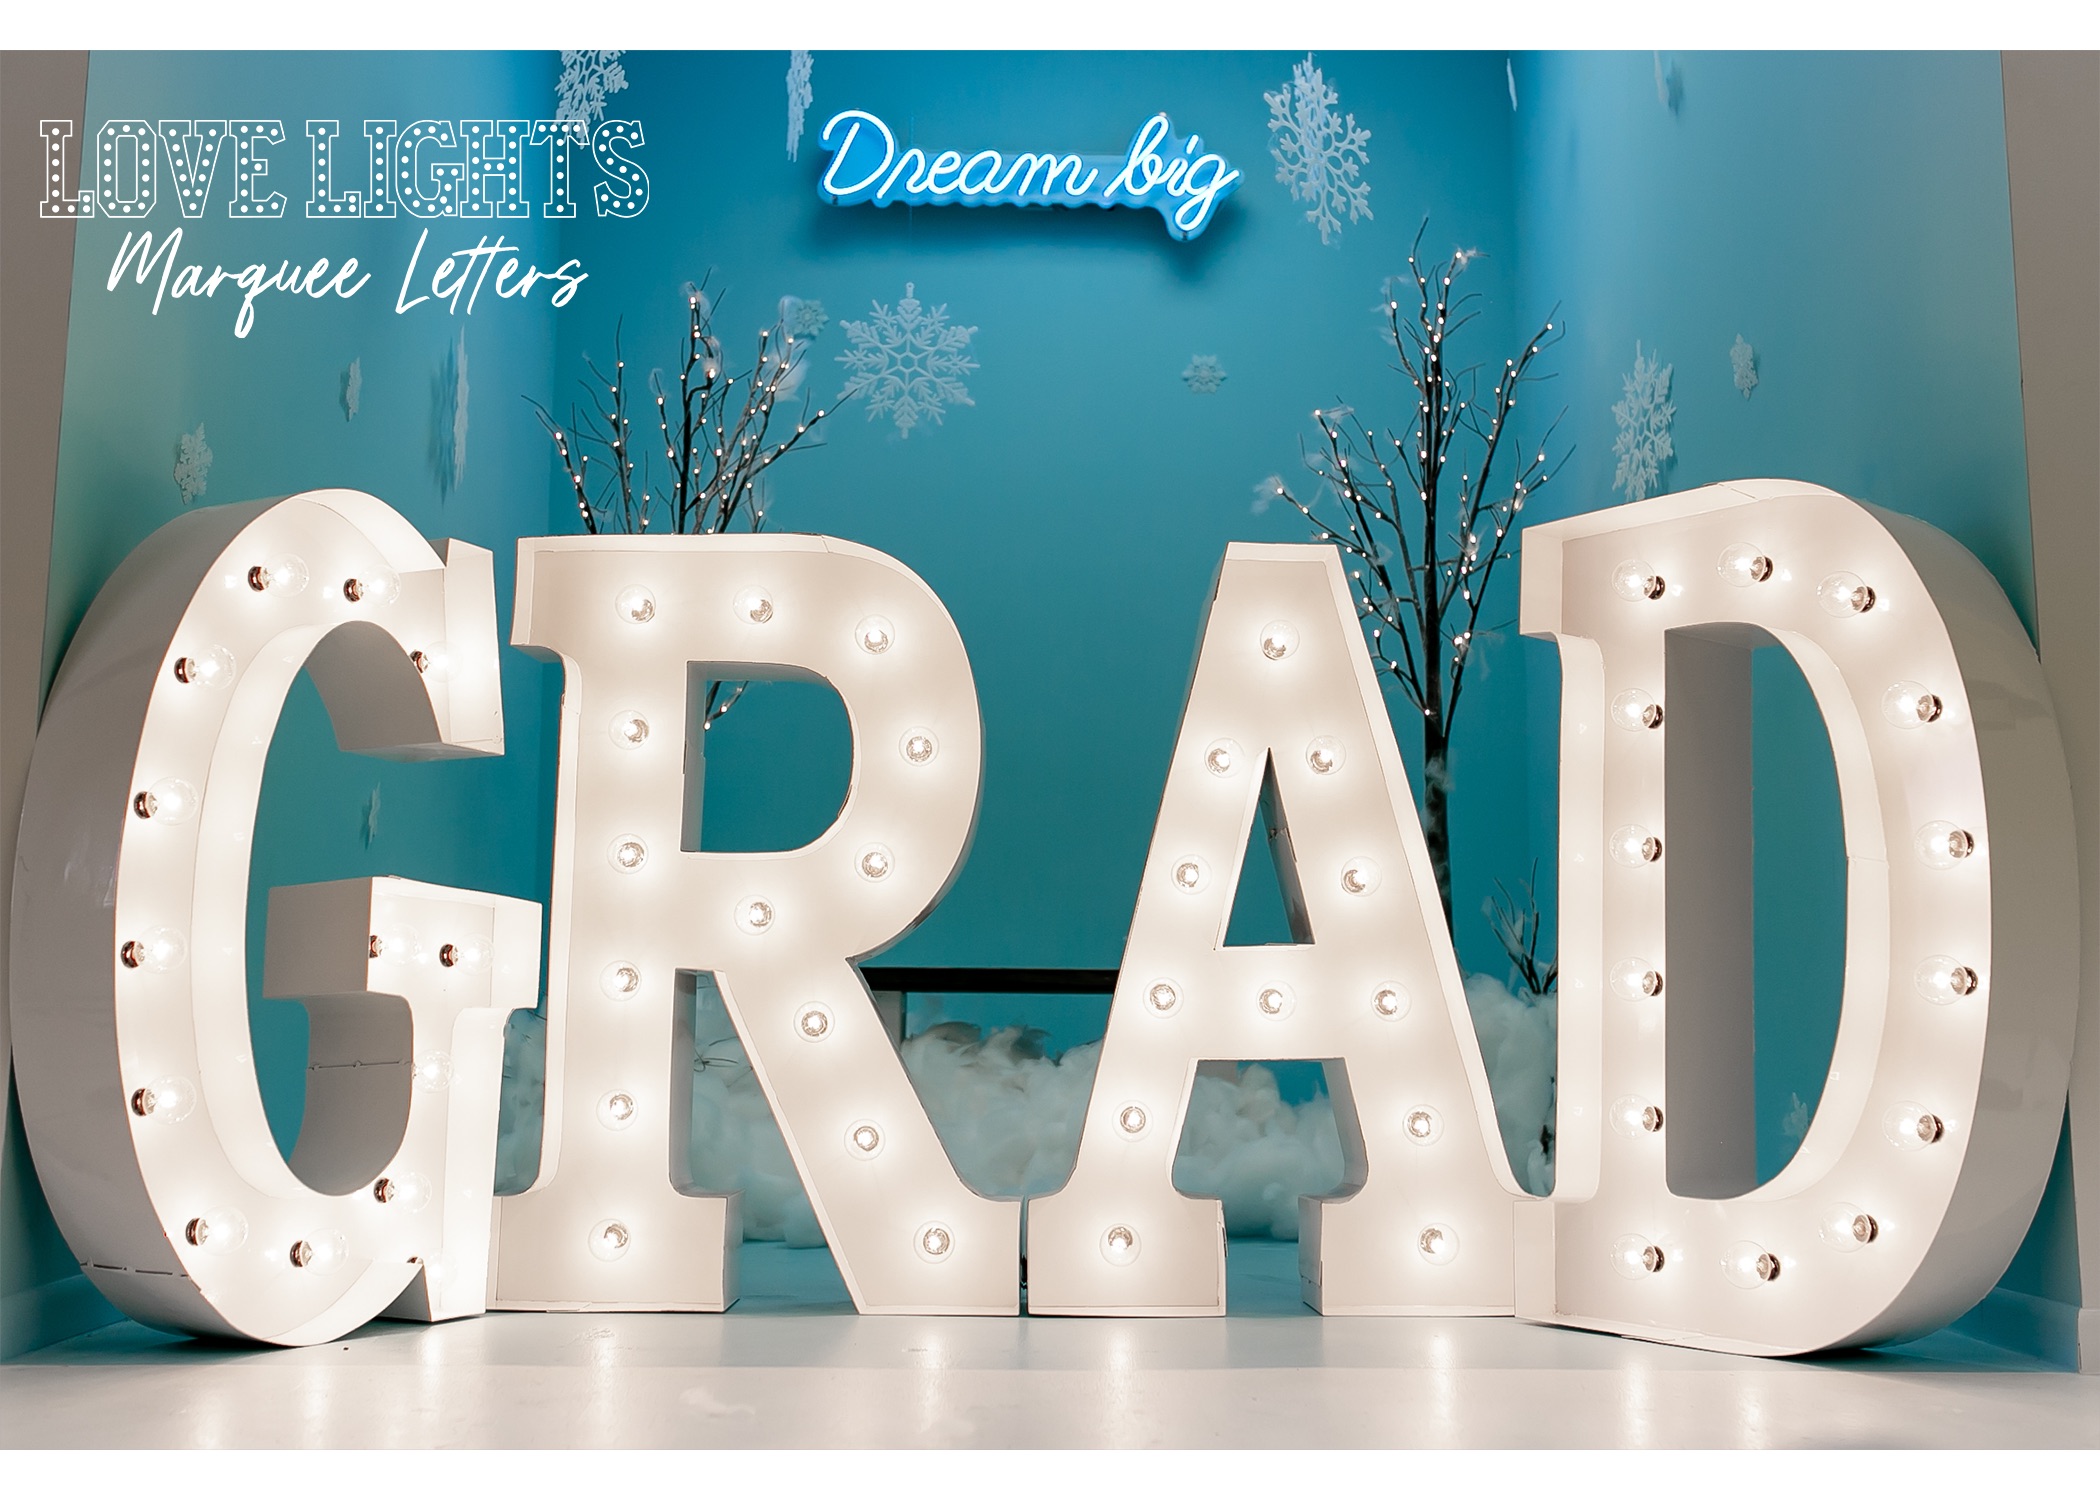 Grad in lit marquee letters in blue winter decorated room with words Dream big